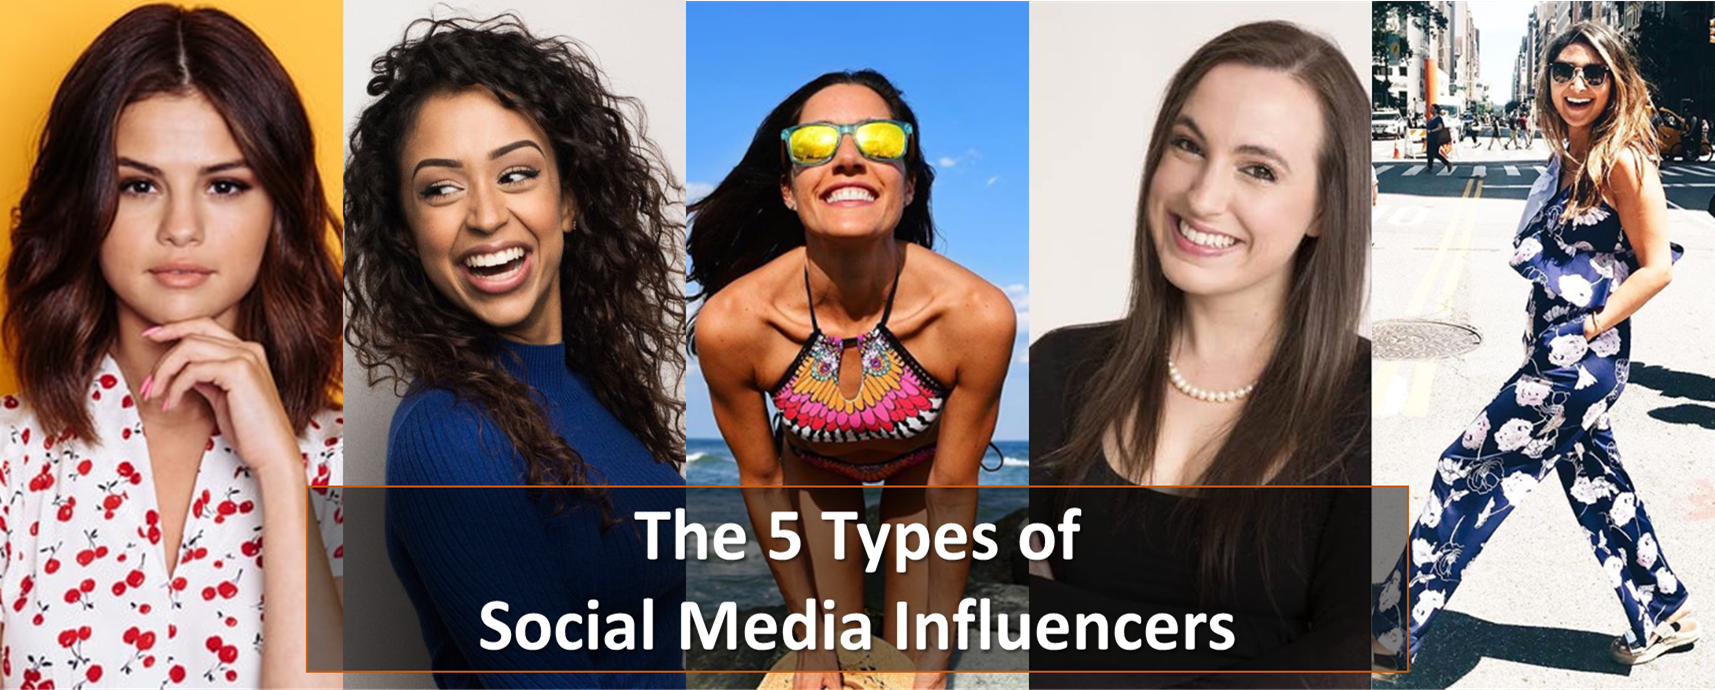 5 Types of Social Media Influencers